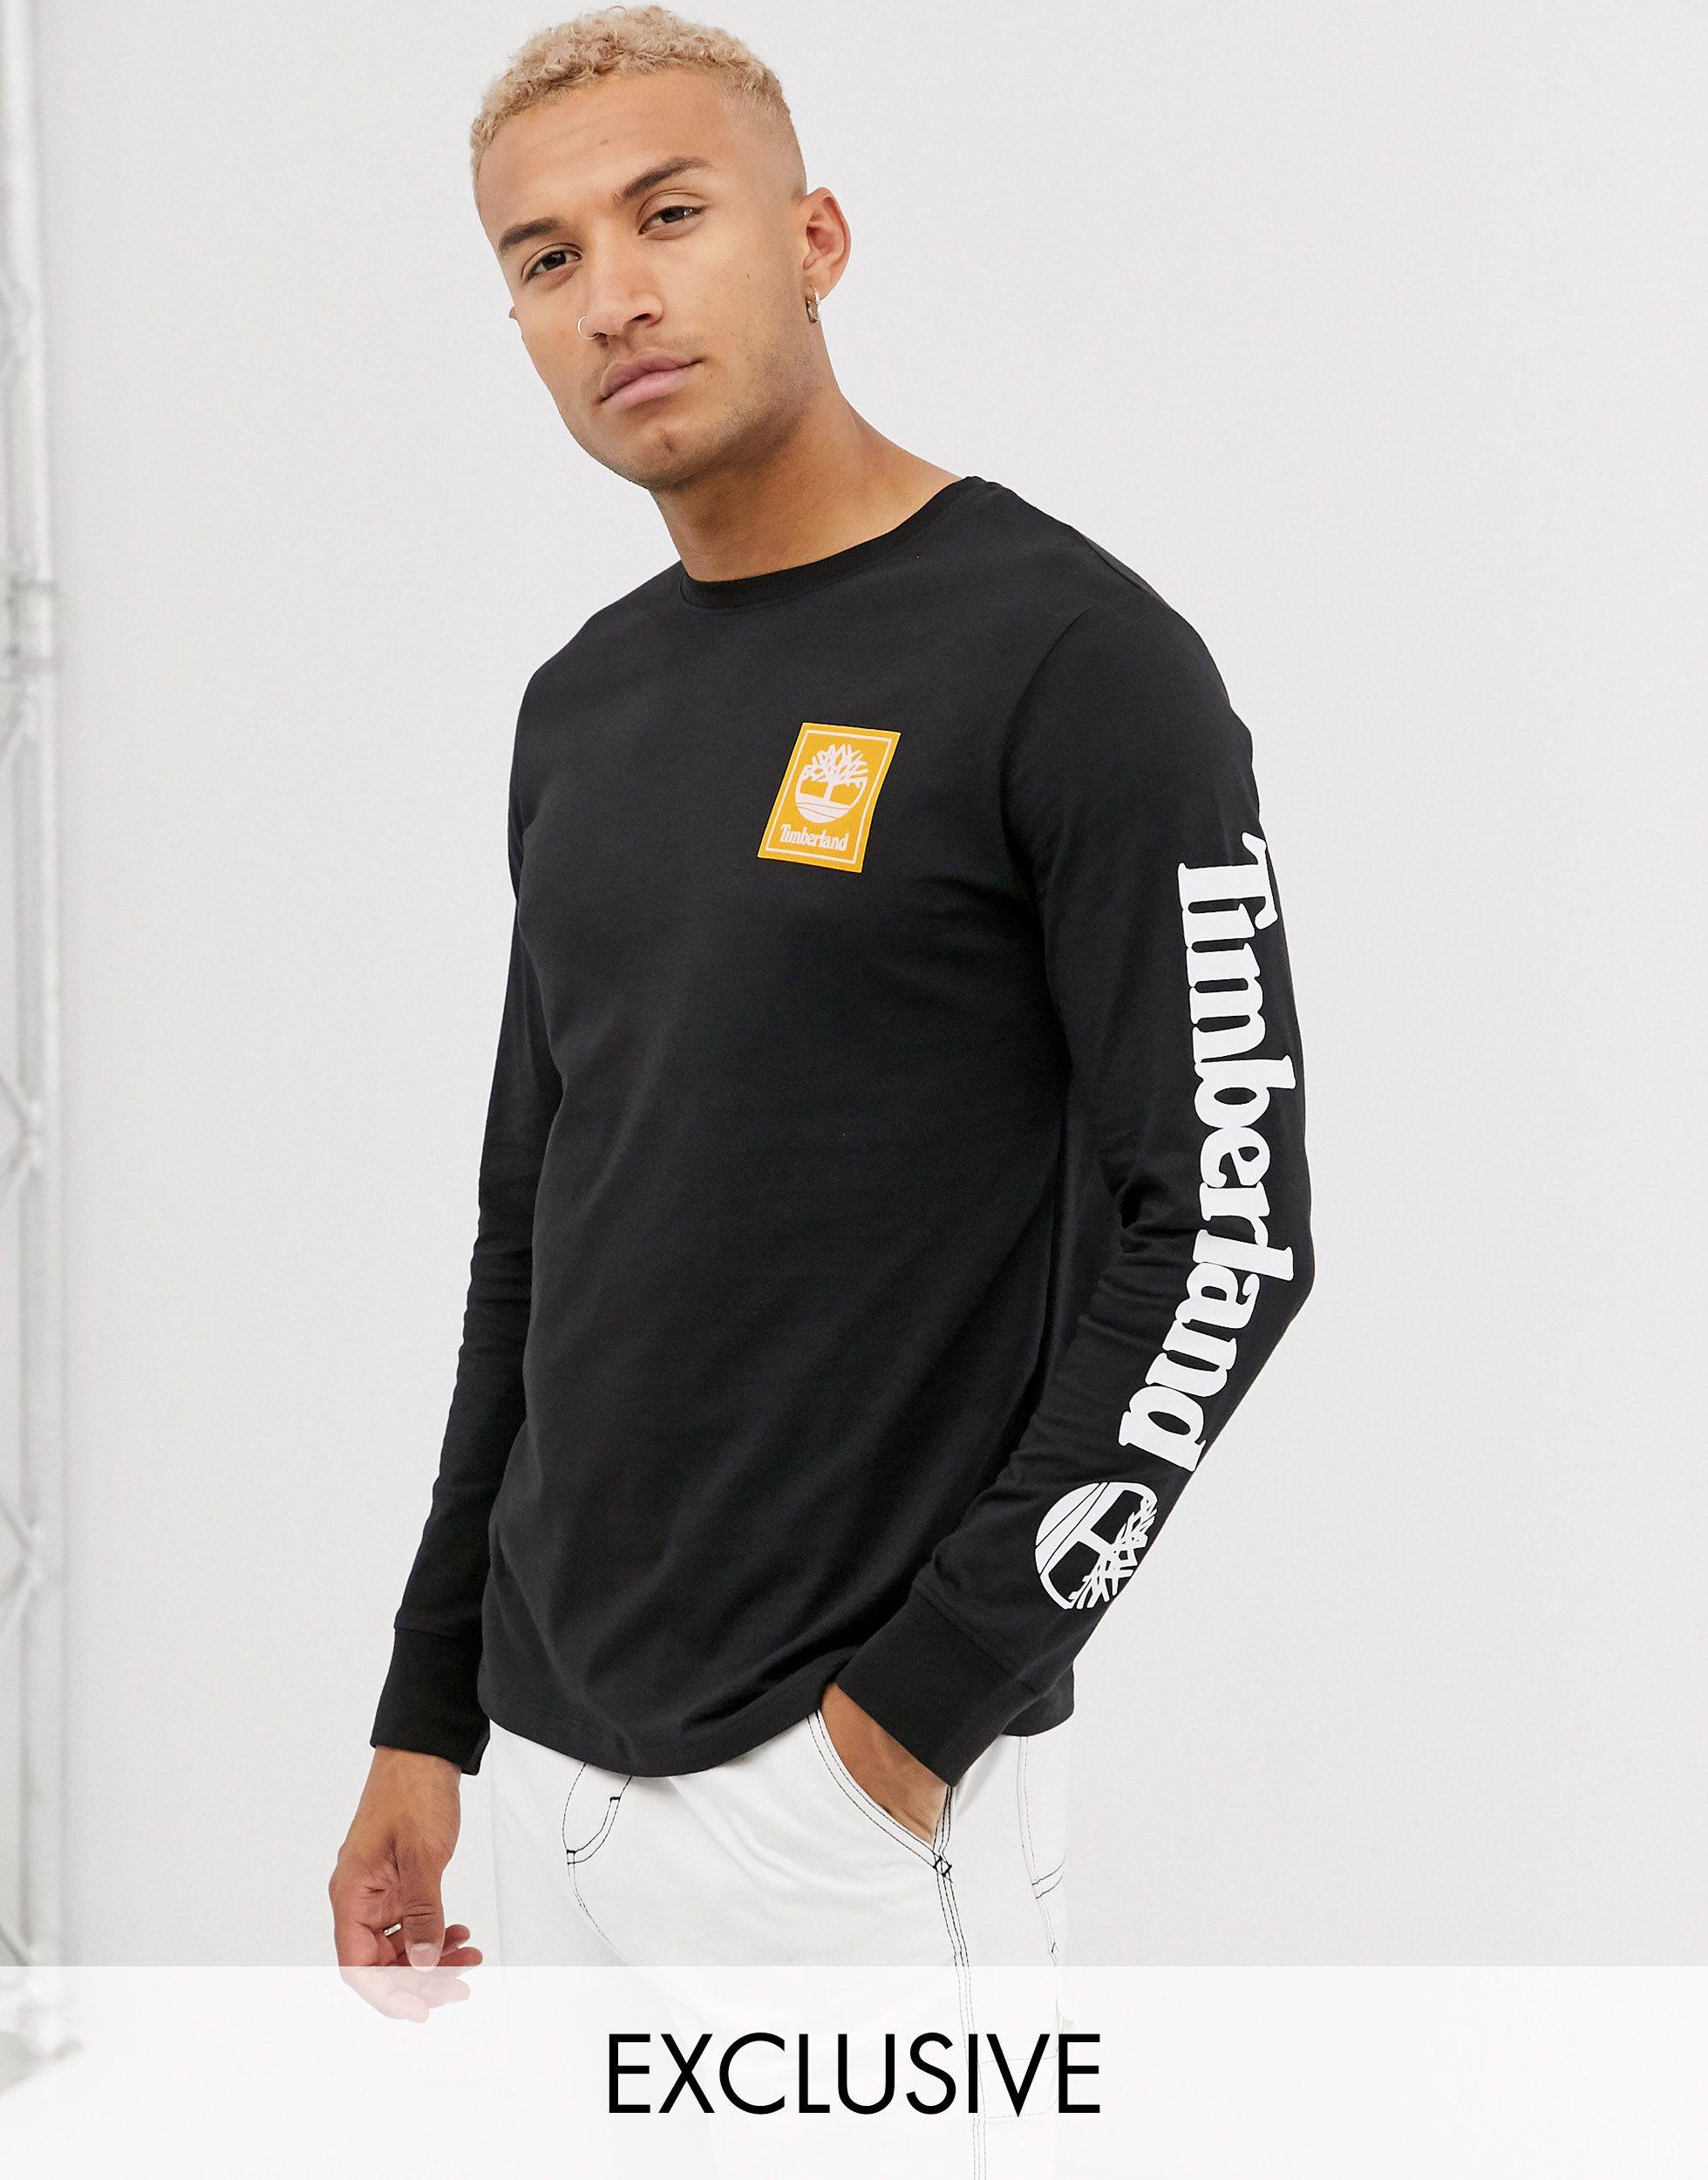 Long Arm Lyst for in T-shirt Black Sleeve Logo Exclusive | Timberland Men